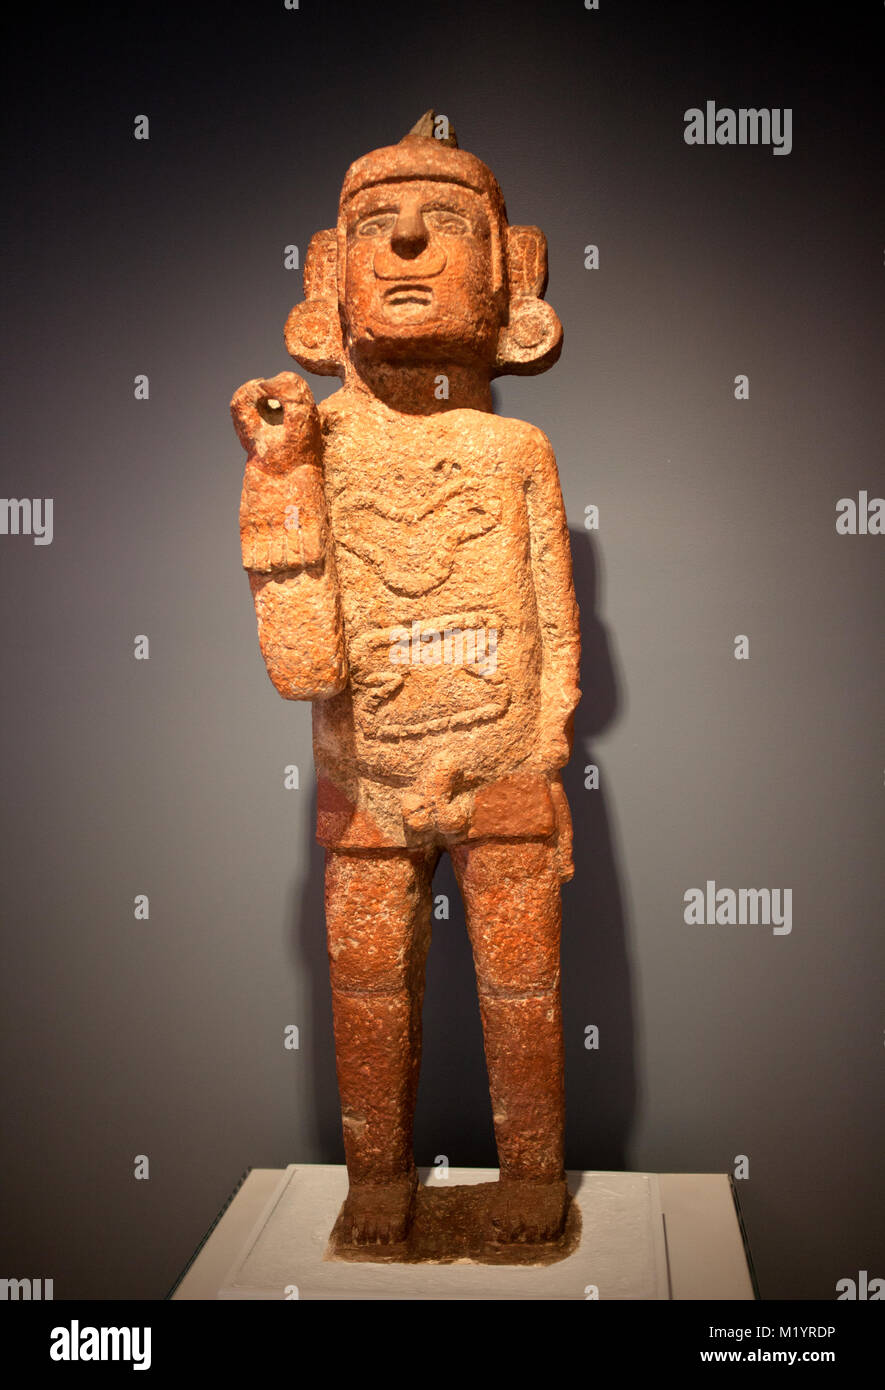 An image of the god Xipe-Totec displayed in Museo Amparo, in Puebla de los Angeles, Mexico Stock Photo